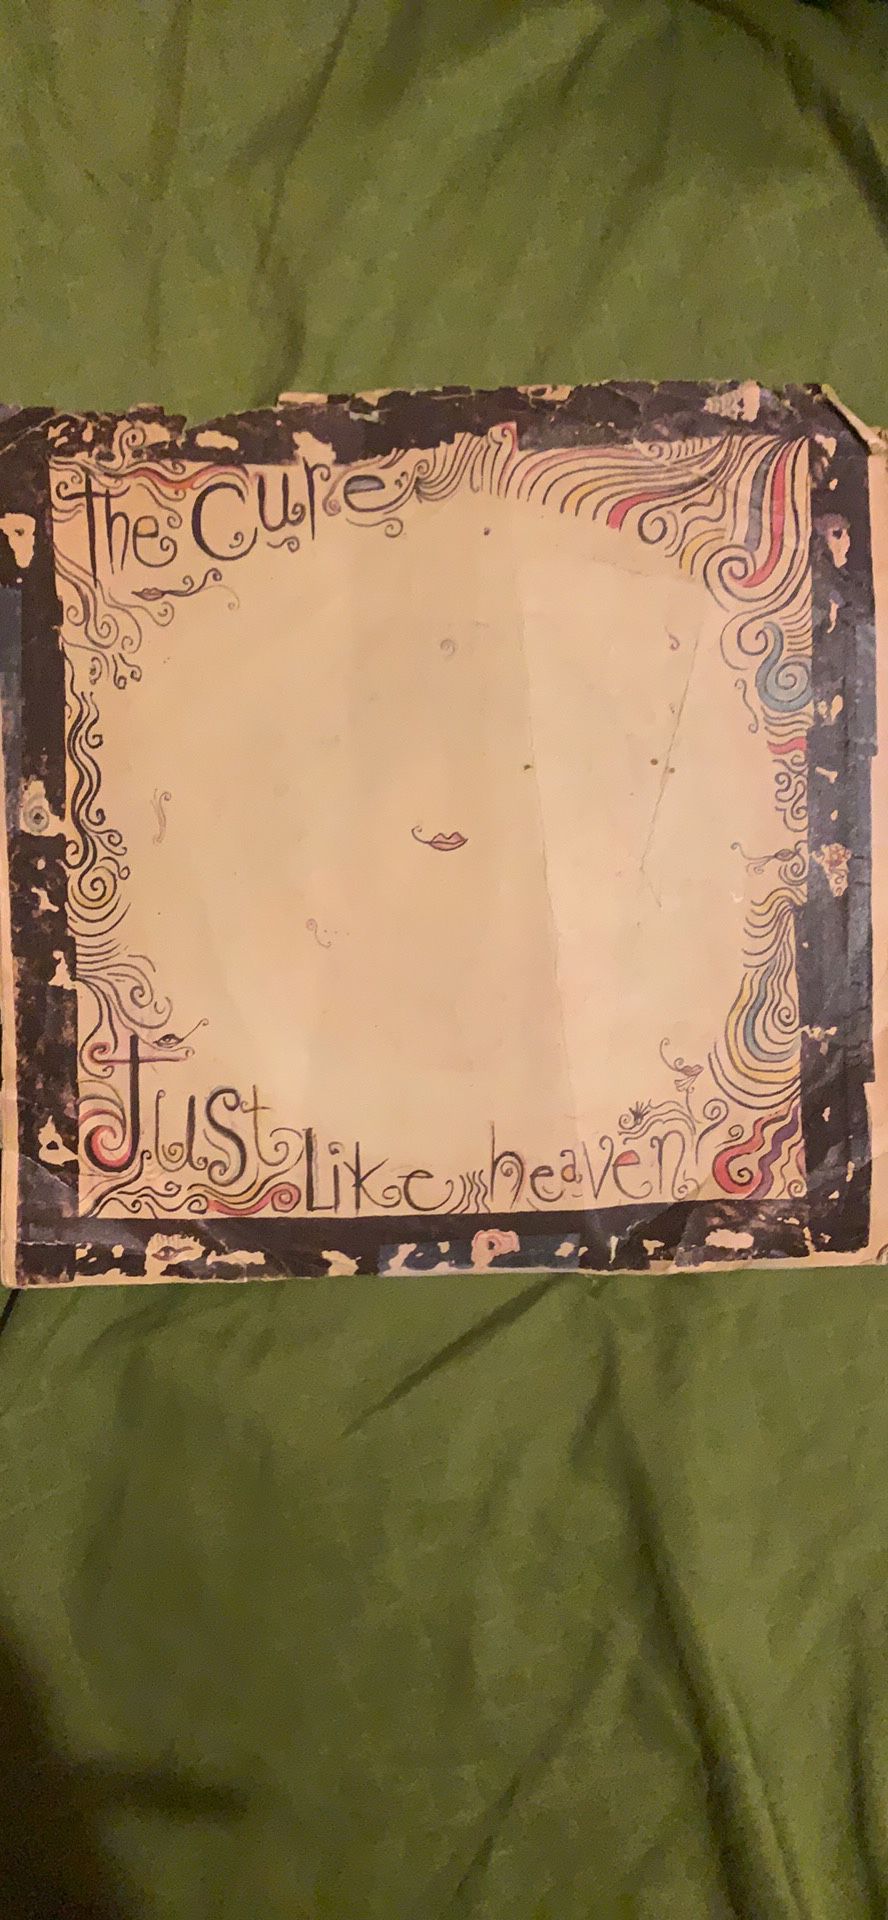 The Cure Vinyl